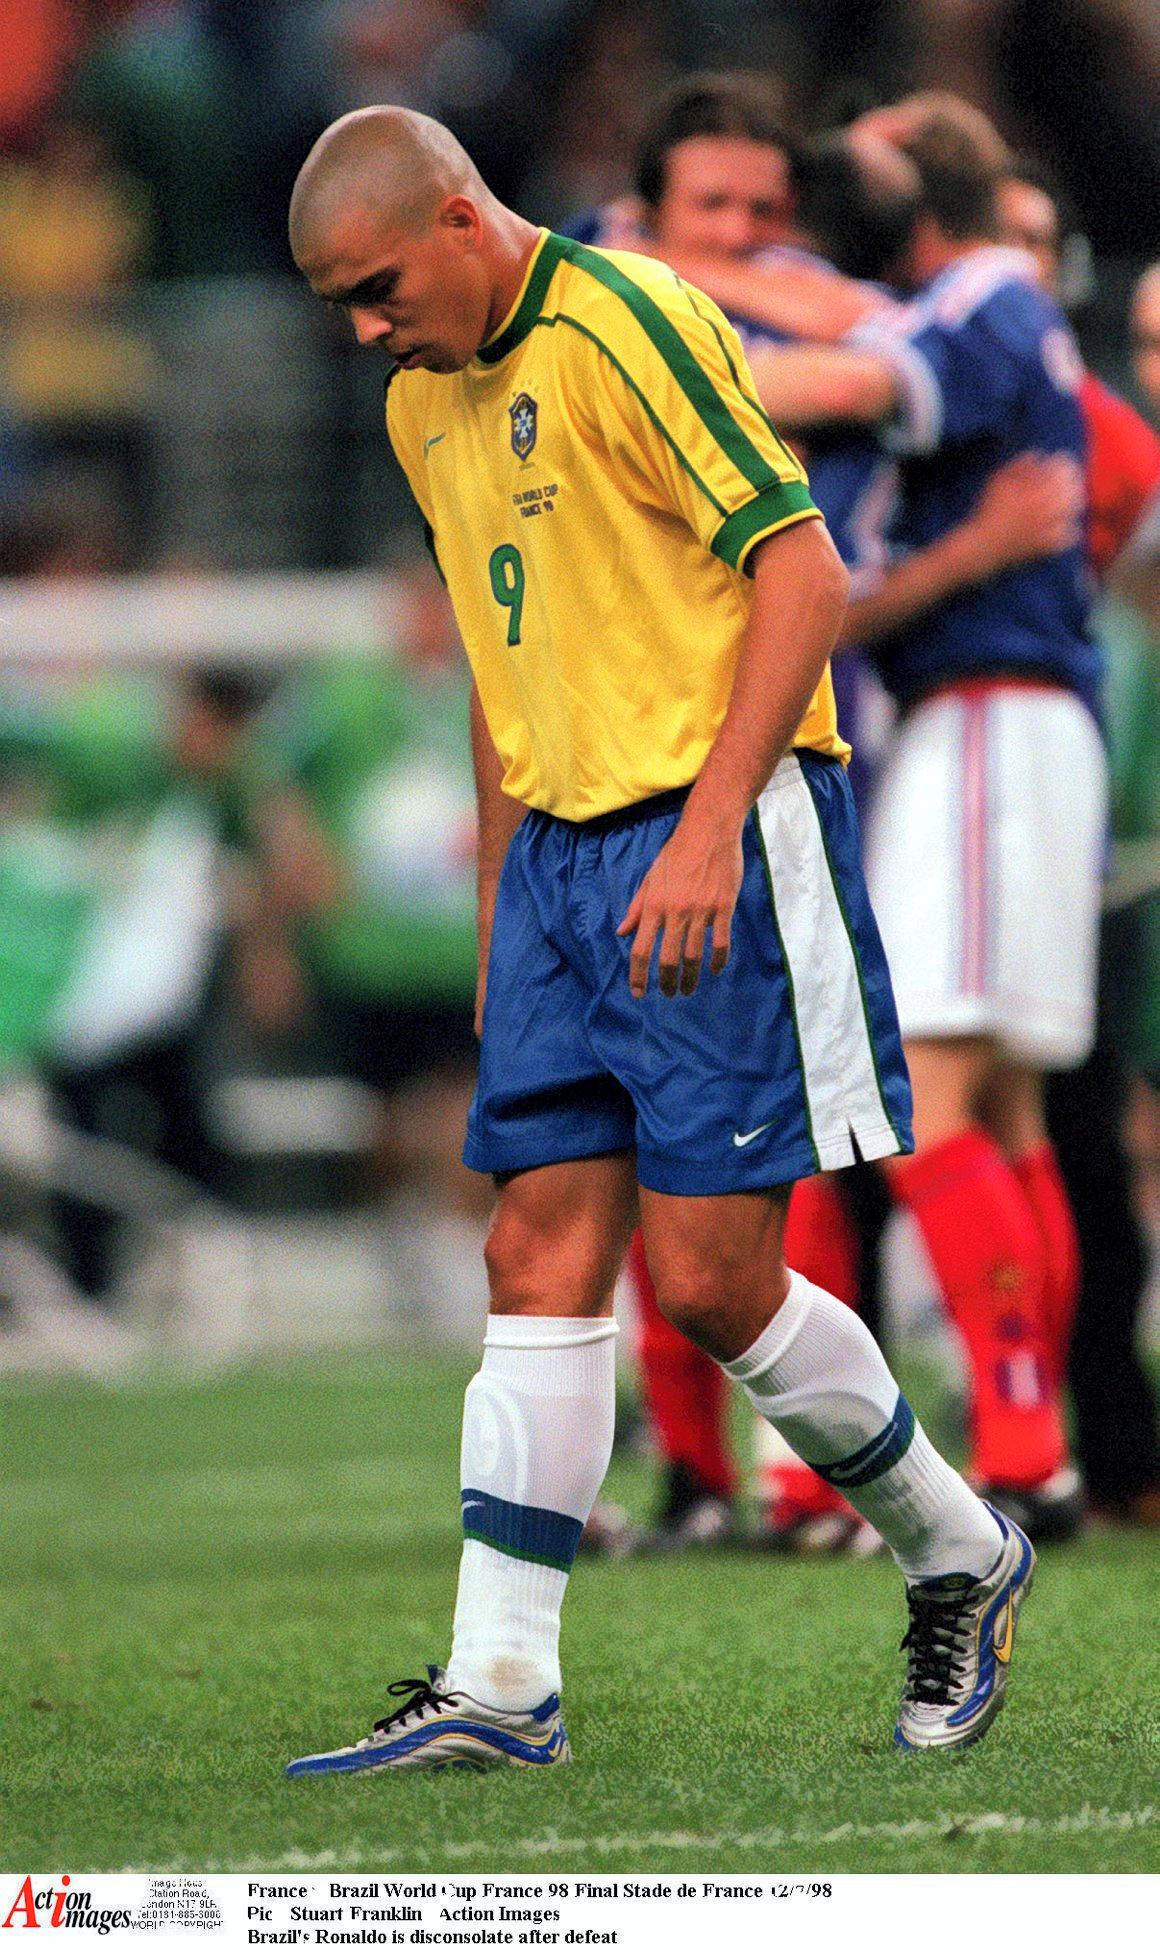 Ronaldo: The mystery of the 1998 World Cup final, and why Brazil's